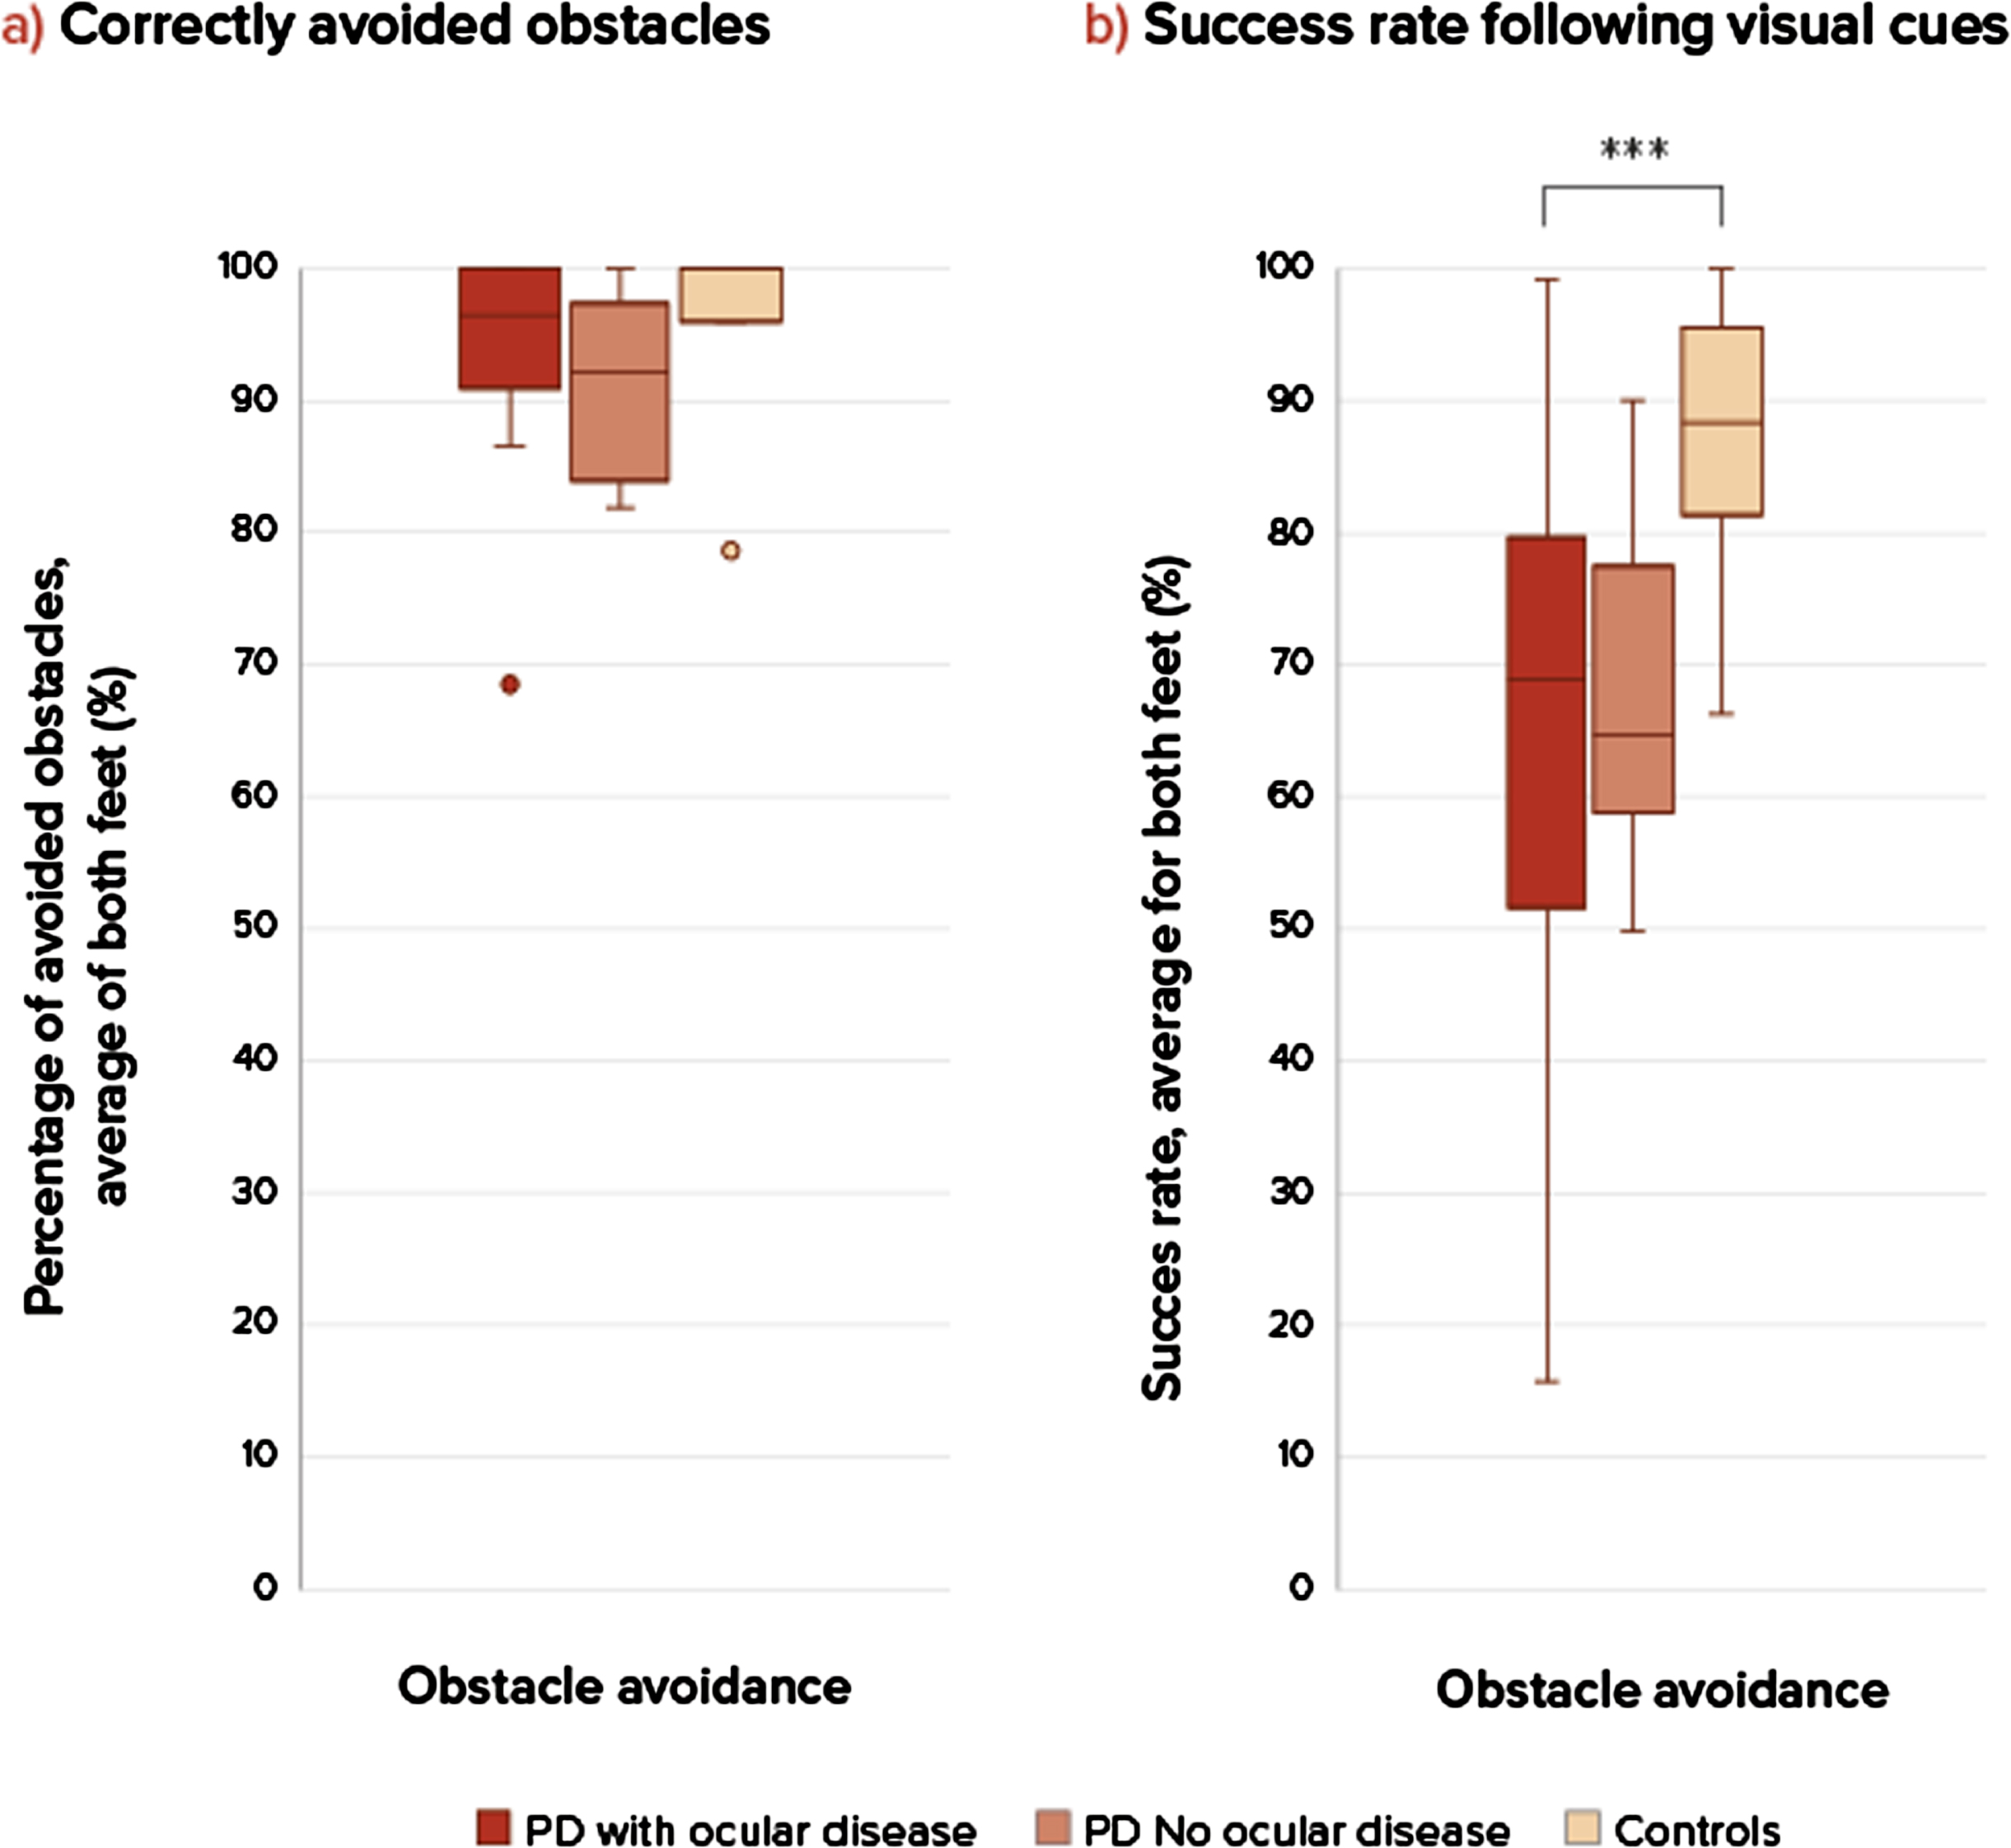 Success rates in obstacle avoidance. a) On the left side is the percentage of correctly avoided obstacles for each group, there were no significant differences. b) On the right sight is the success rate (percentage hit stepping stones during obstacle avoidance compared between three groups: PD patients with ocular disorders, without ocular disorders and healthy controls at comfortable walking speeds. A p-value of p < 0.05 was considered as significant. Only significant differences are addressed with ***. ***Significant difference between groups, PD compared to controls. Success rate during obstacle avoidance (U = 21, p = 0.011), PD compared to controls. There were no significant differences between the two PD groups and controls. NS, not significant.